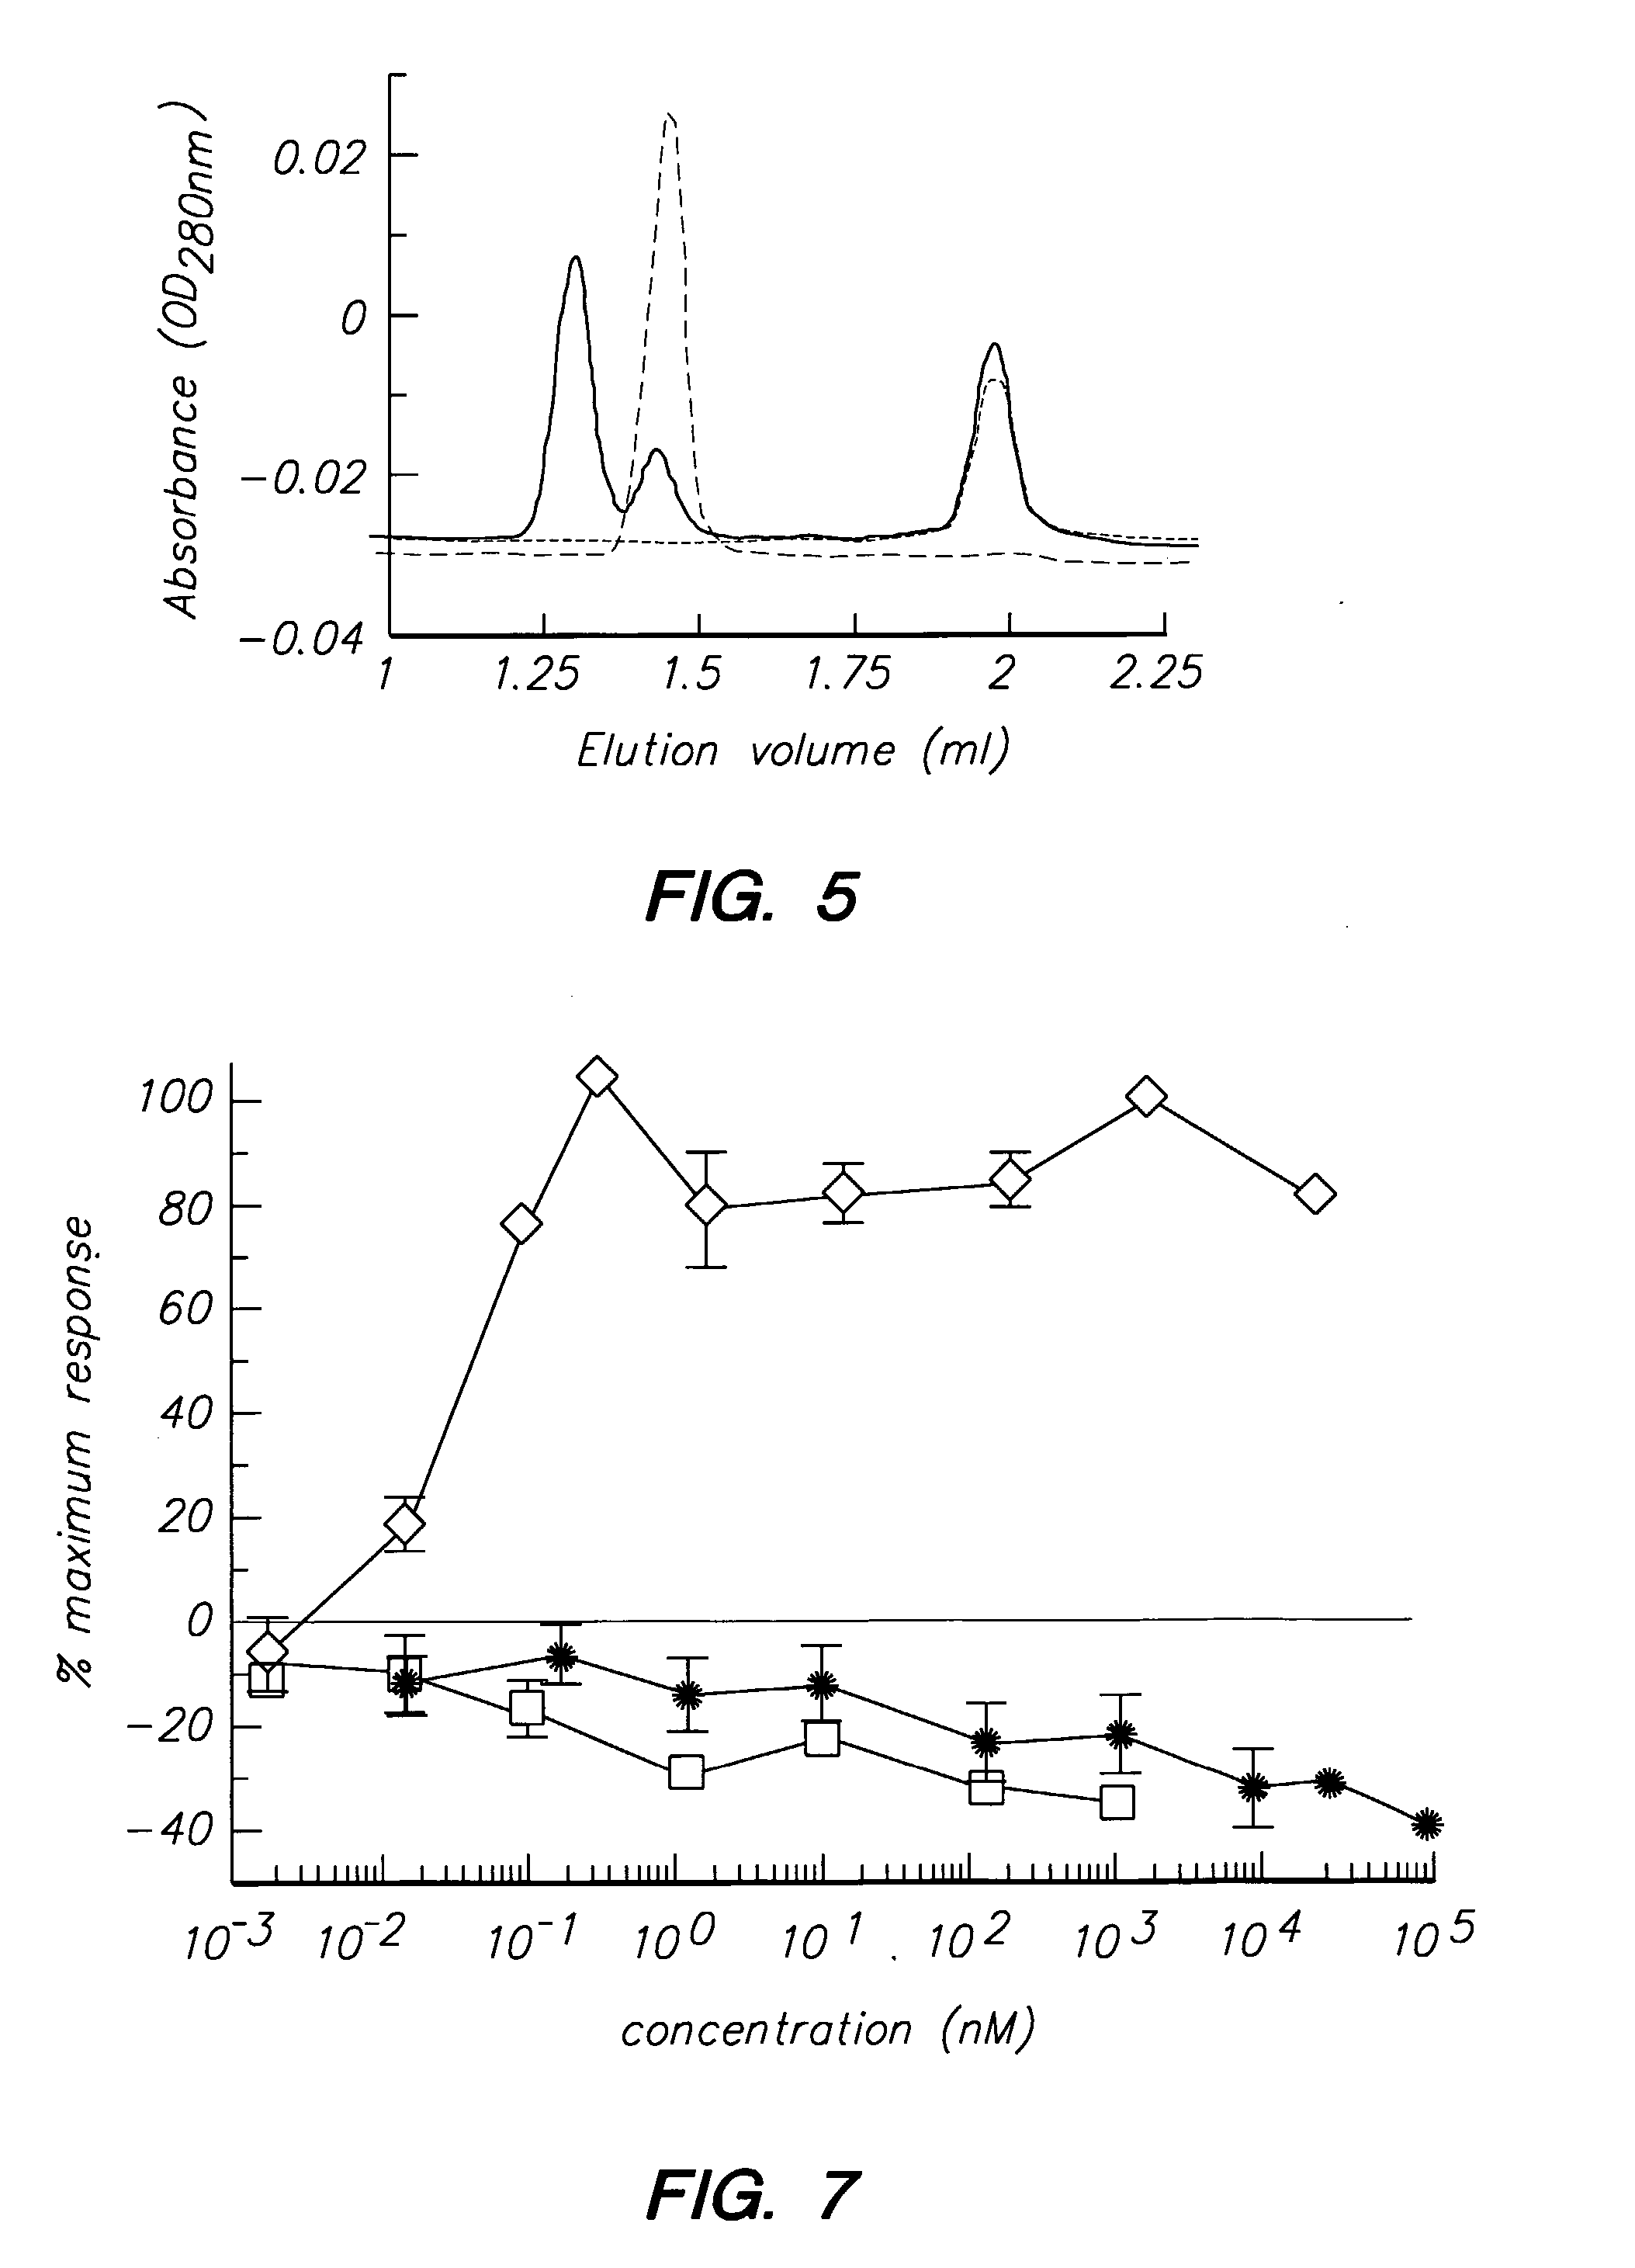 Peptides and compounds that bind to the il-5 receptor